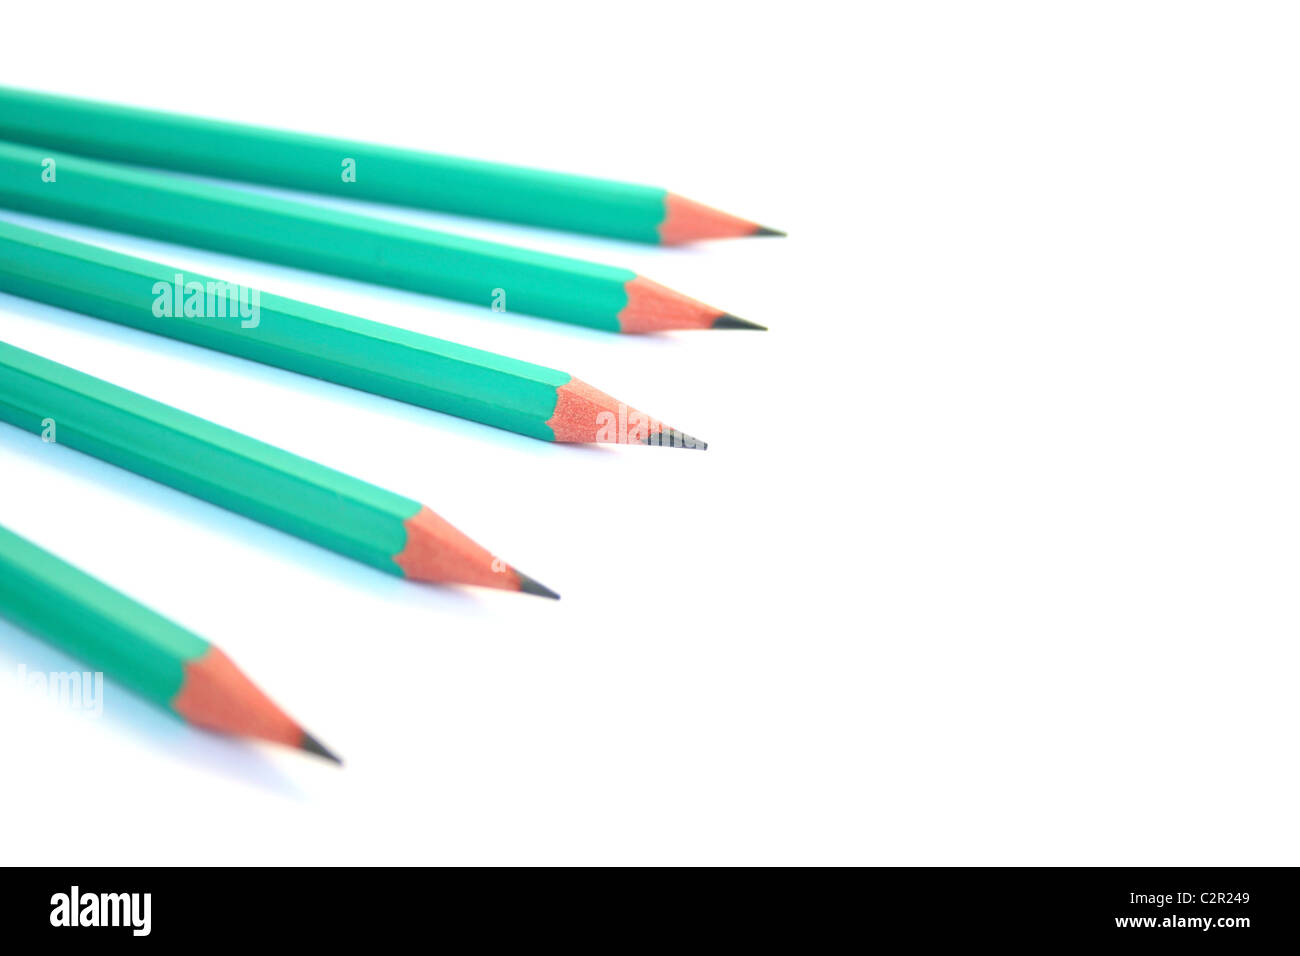 Five pencils on white background. Stock Photo